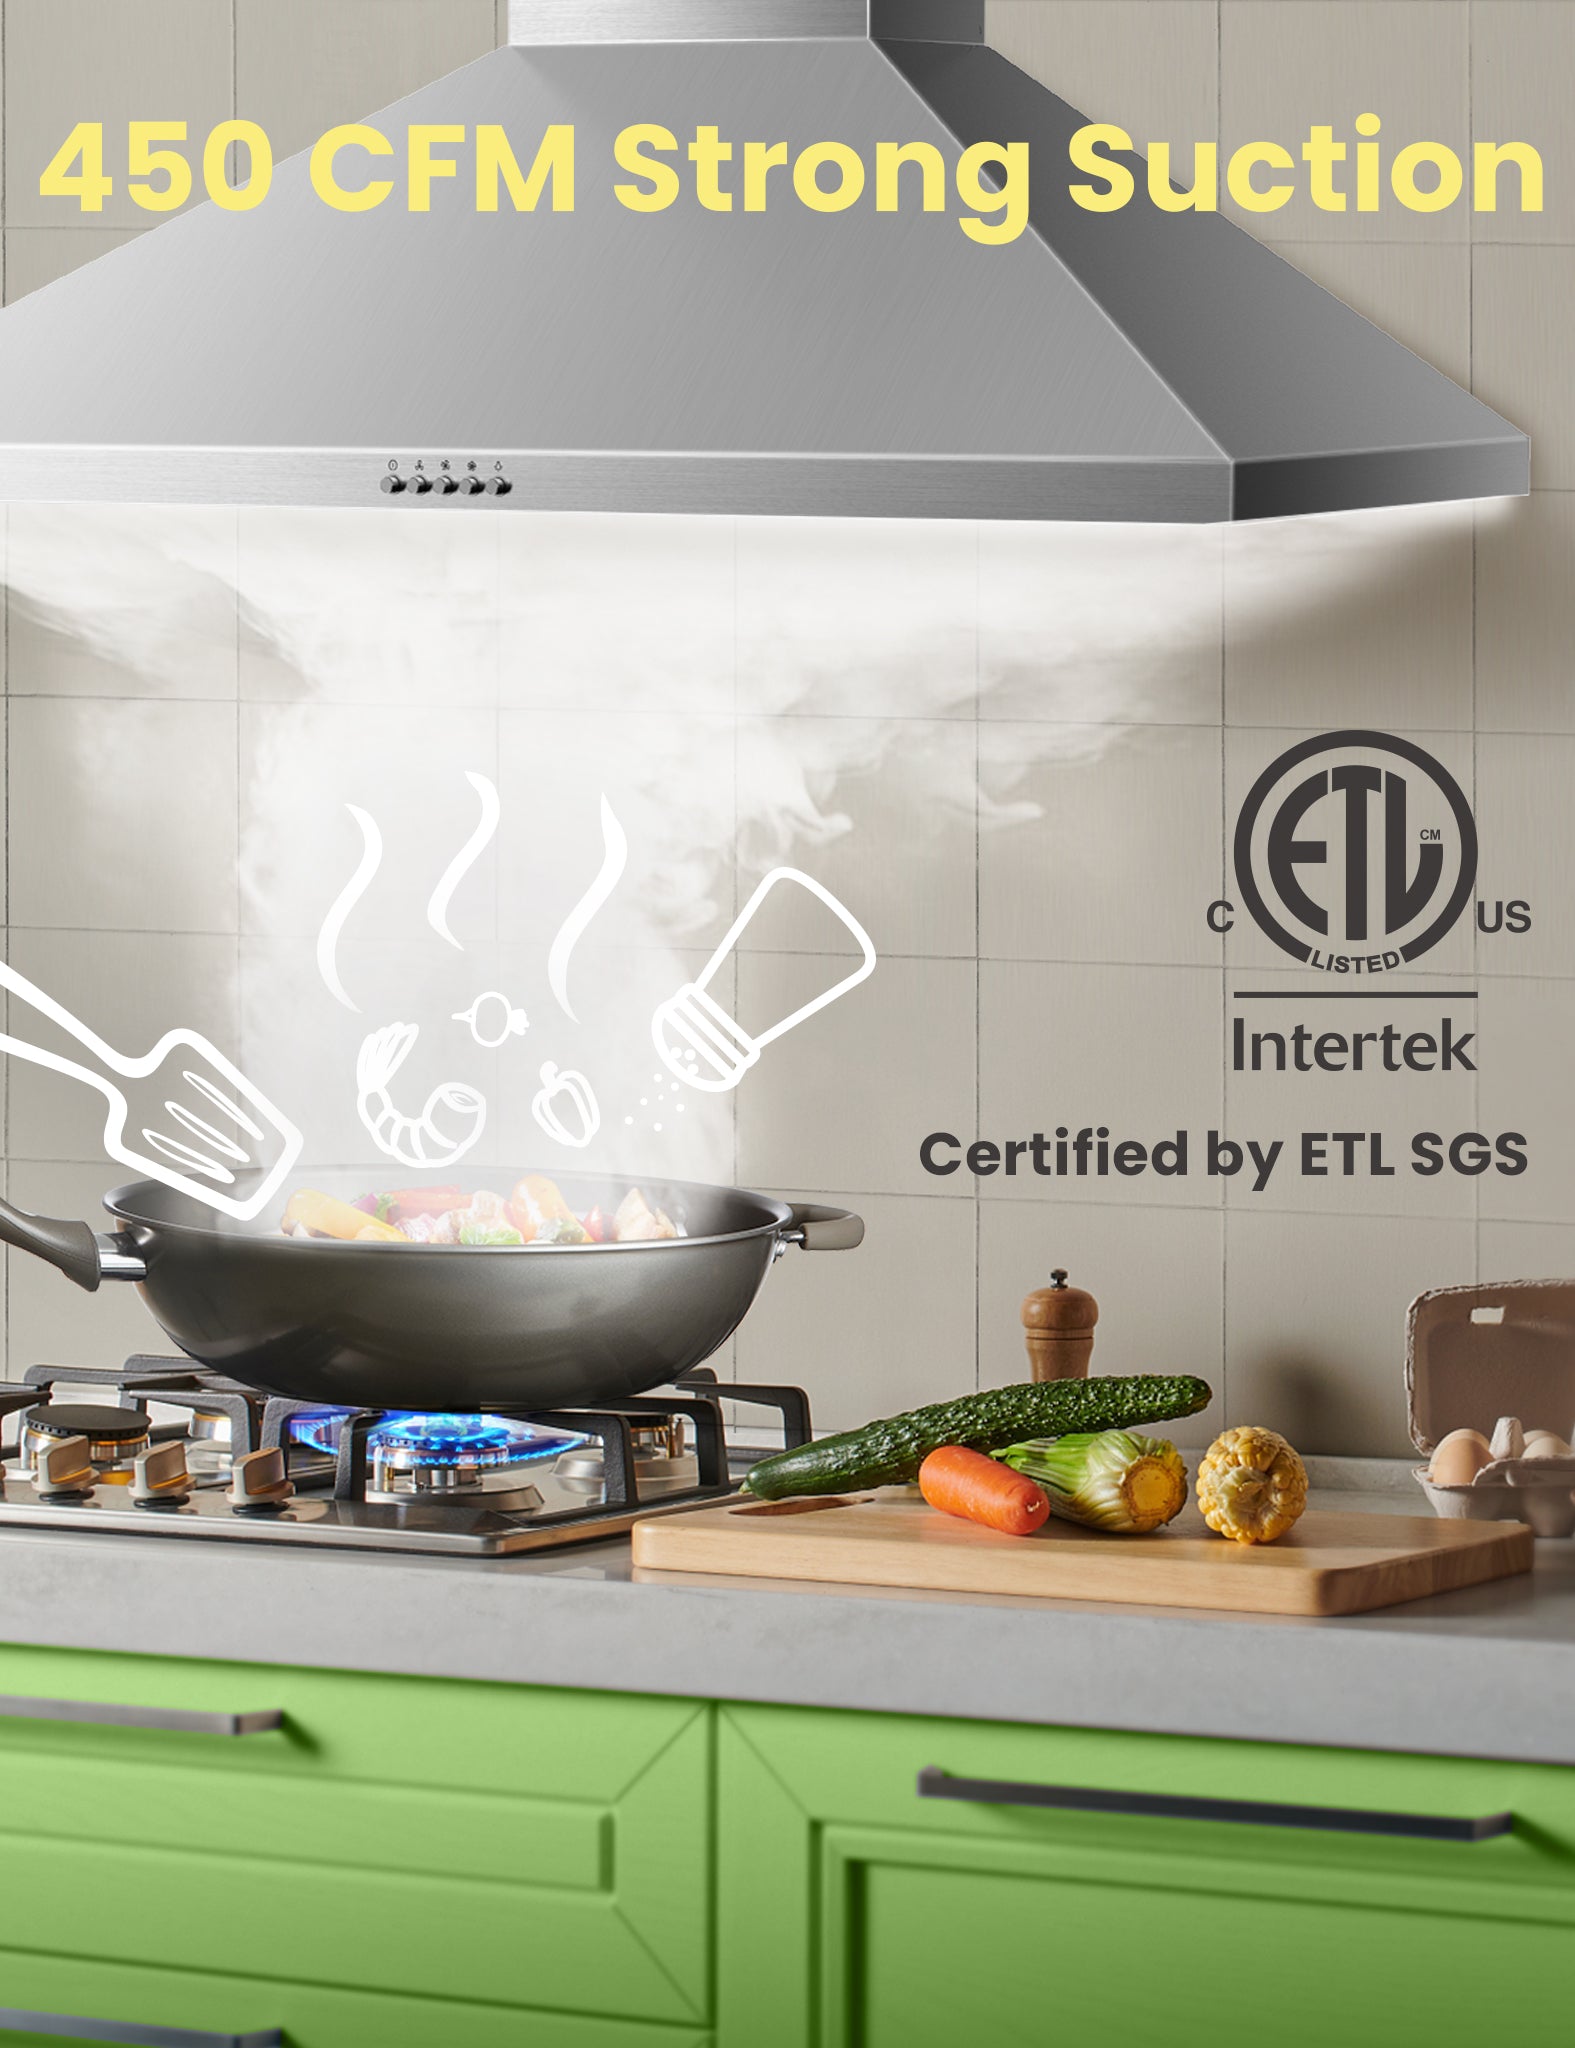 stainless steel ducted range hood taking in smoke from a pot cooking food on a stove